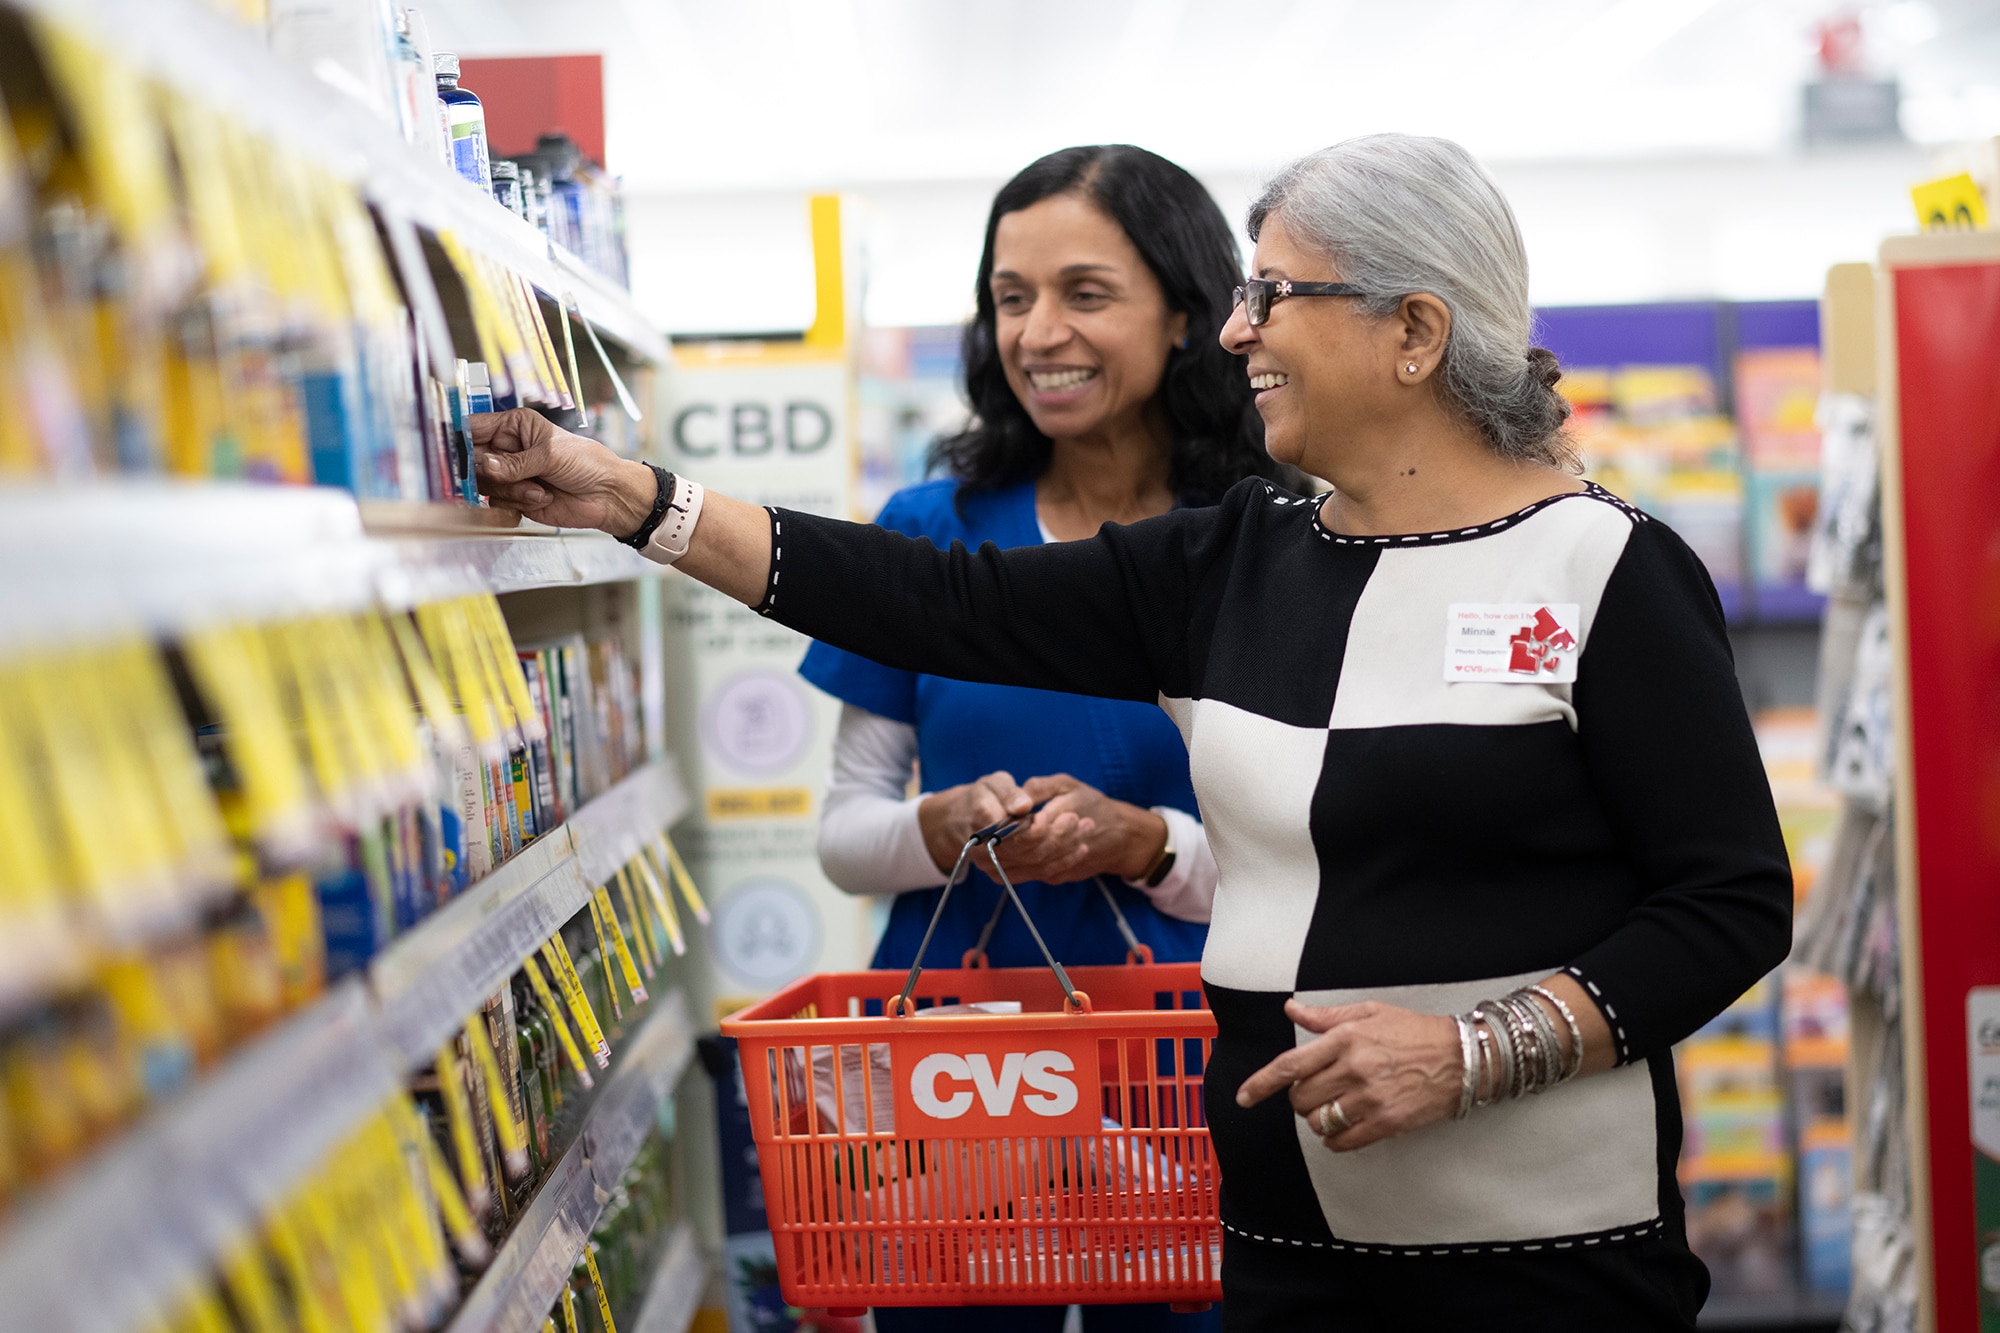 Minnie assists customer Sandhya Harpavat in an aisle. They are both smiling.